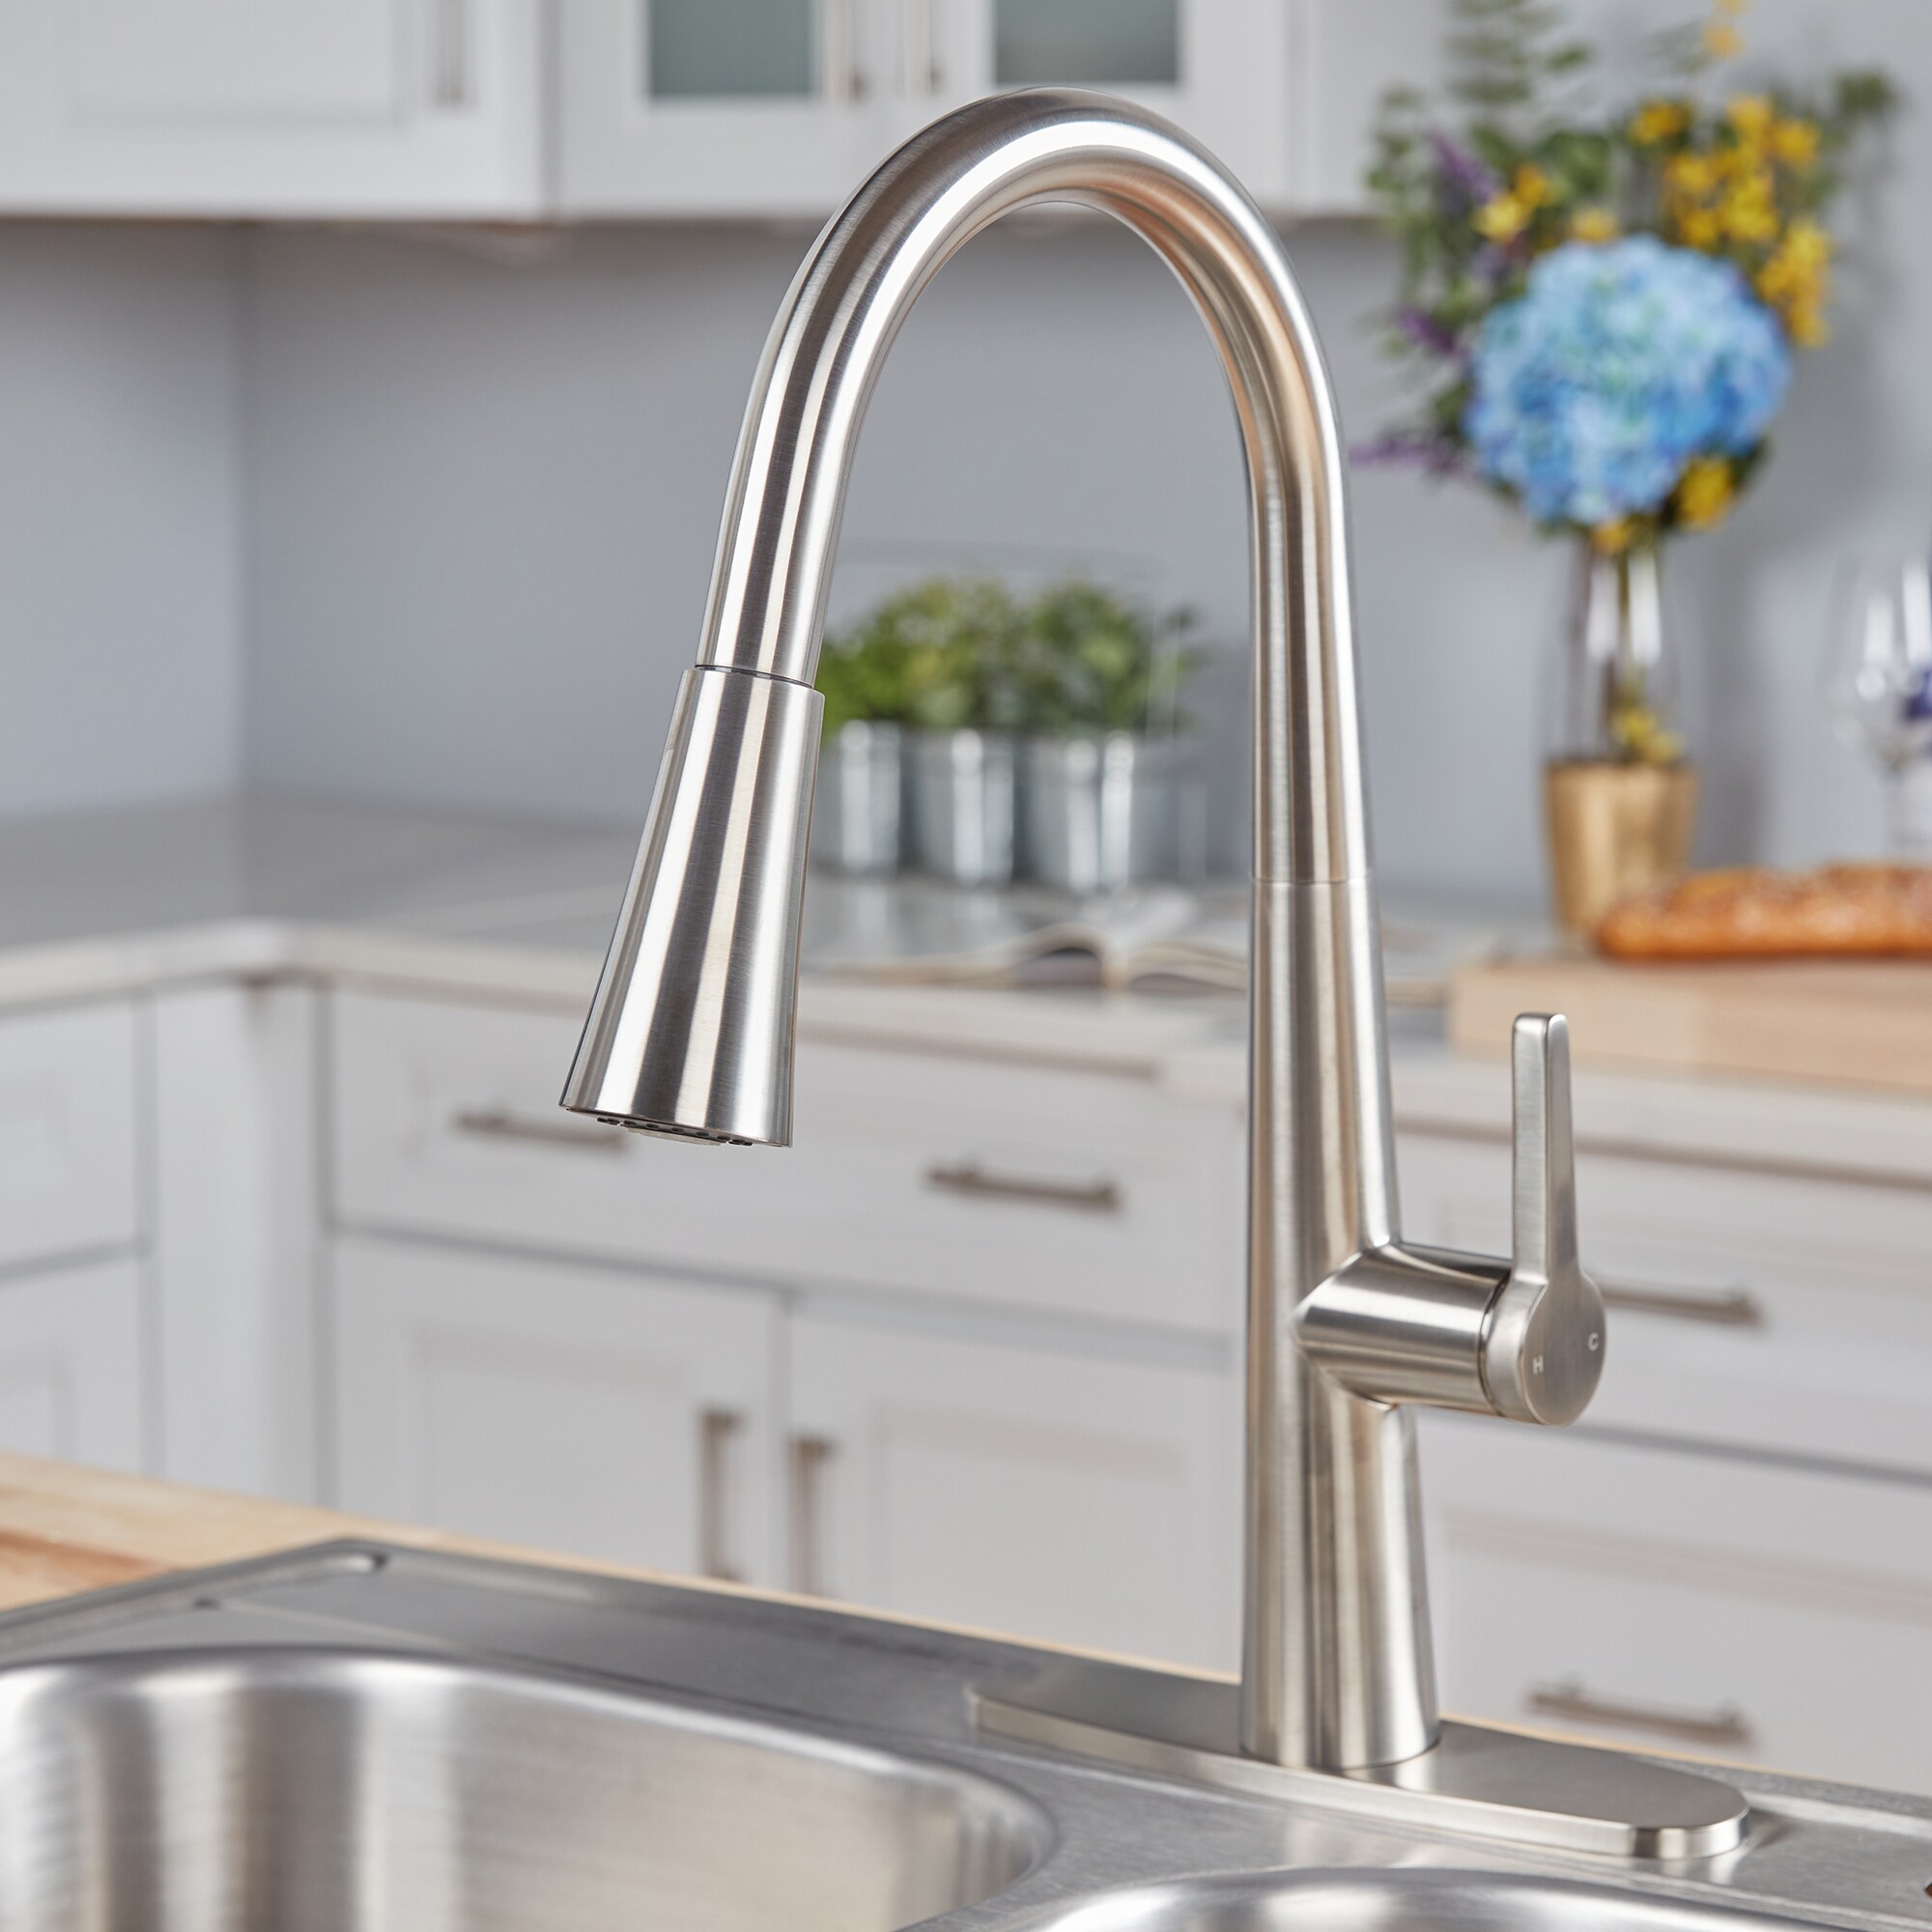 Bryton Stainless Steel 1-Handle Pull-Down Kitchen Faucet W/ LED Light Deck Plate 